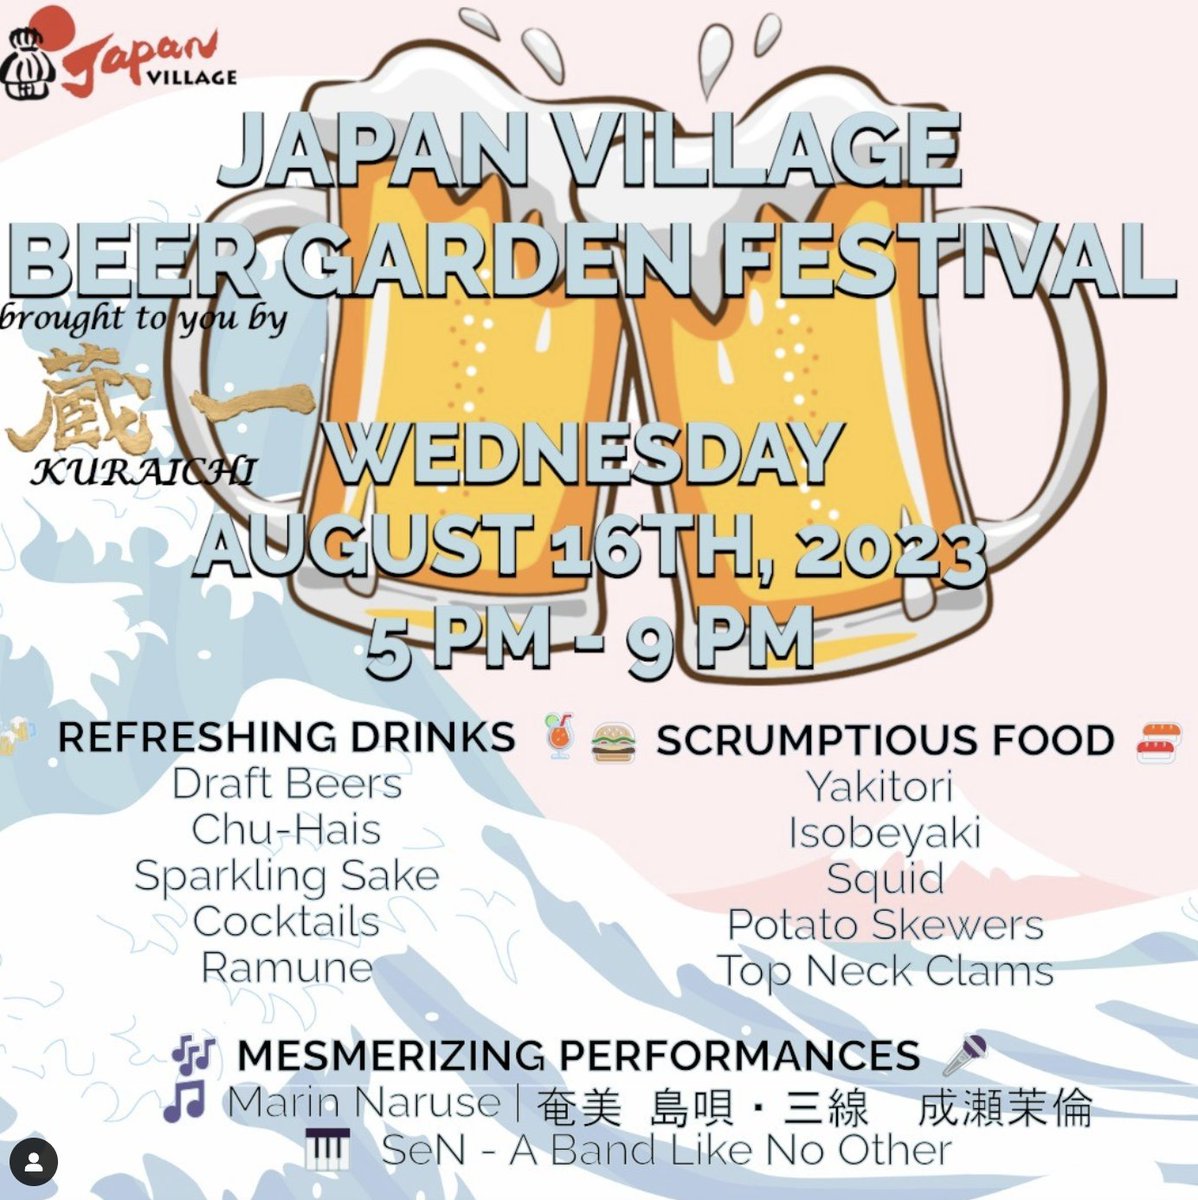 🍻 Kanpai! 🍻
TODAY at Japan Village and Sunrise Mart, hit the #BeerGardenFest, open till 9:00 PM! Share the joy with #JapanVillage #SavorTheSummer 📸🍻 
Don't miss out on this unforgettable event! 🎊🌸
🎟️ TICKETS HERE: loom.ly/3VxAQPs